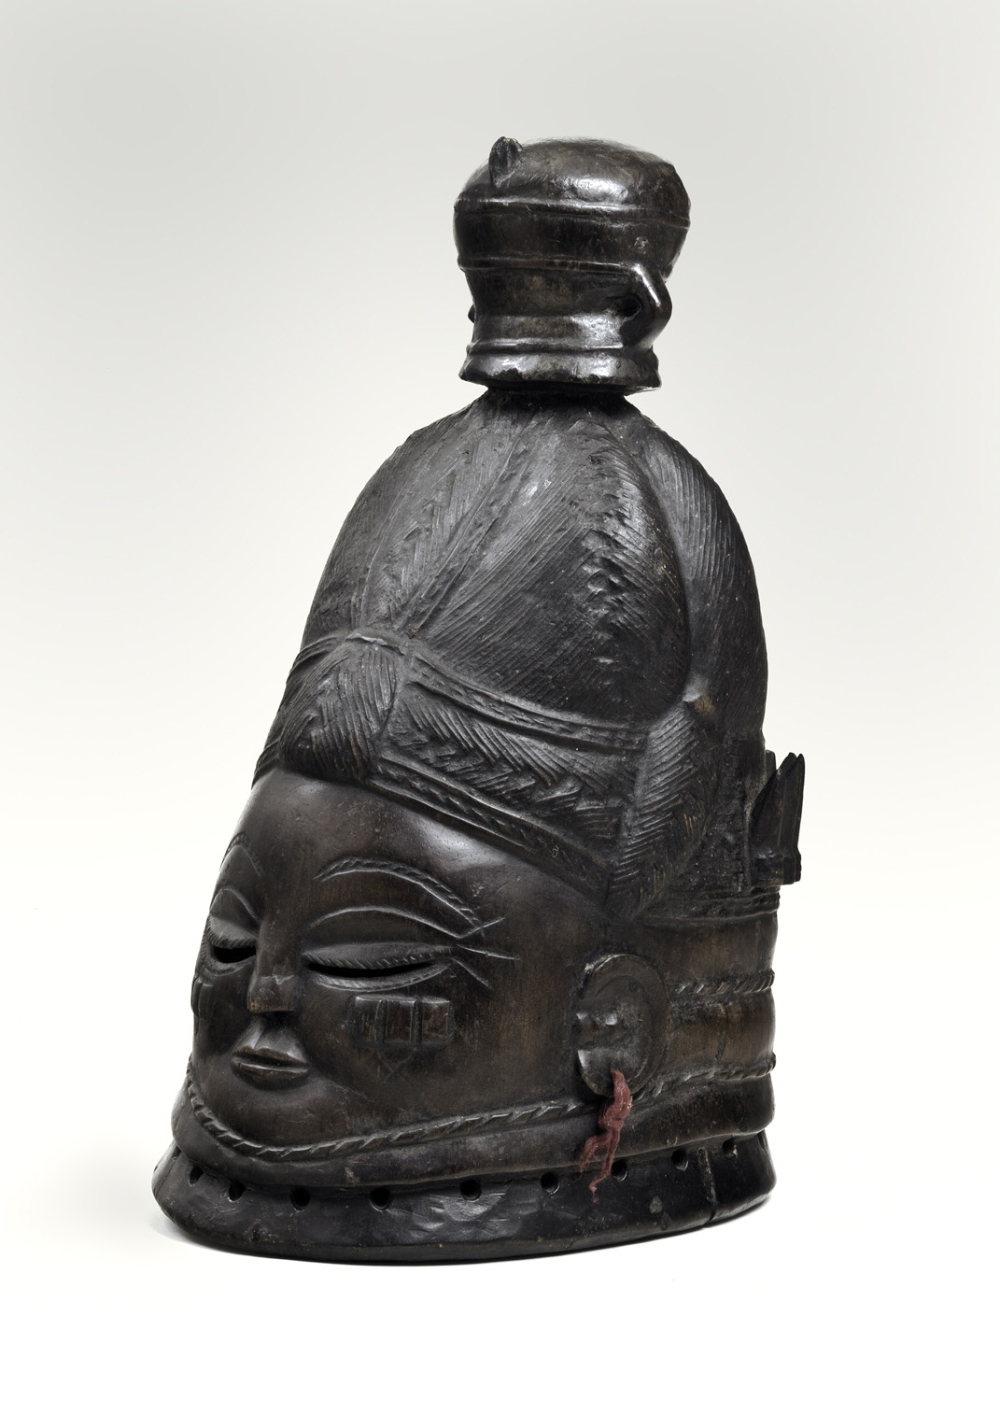 thumbnail of Helmet mask (sowei) from Mende, Sierra Leone. medium: wood, black and brown. dimensions: 15.5 x 9.5 inches